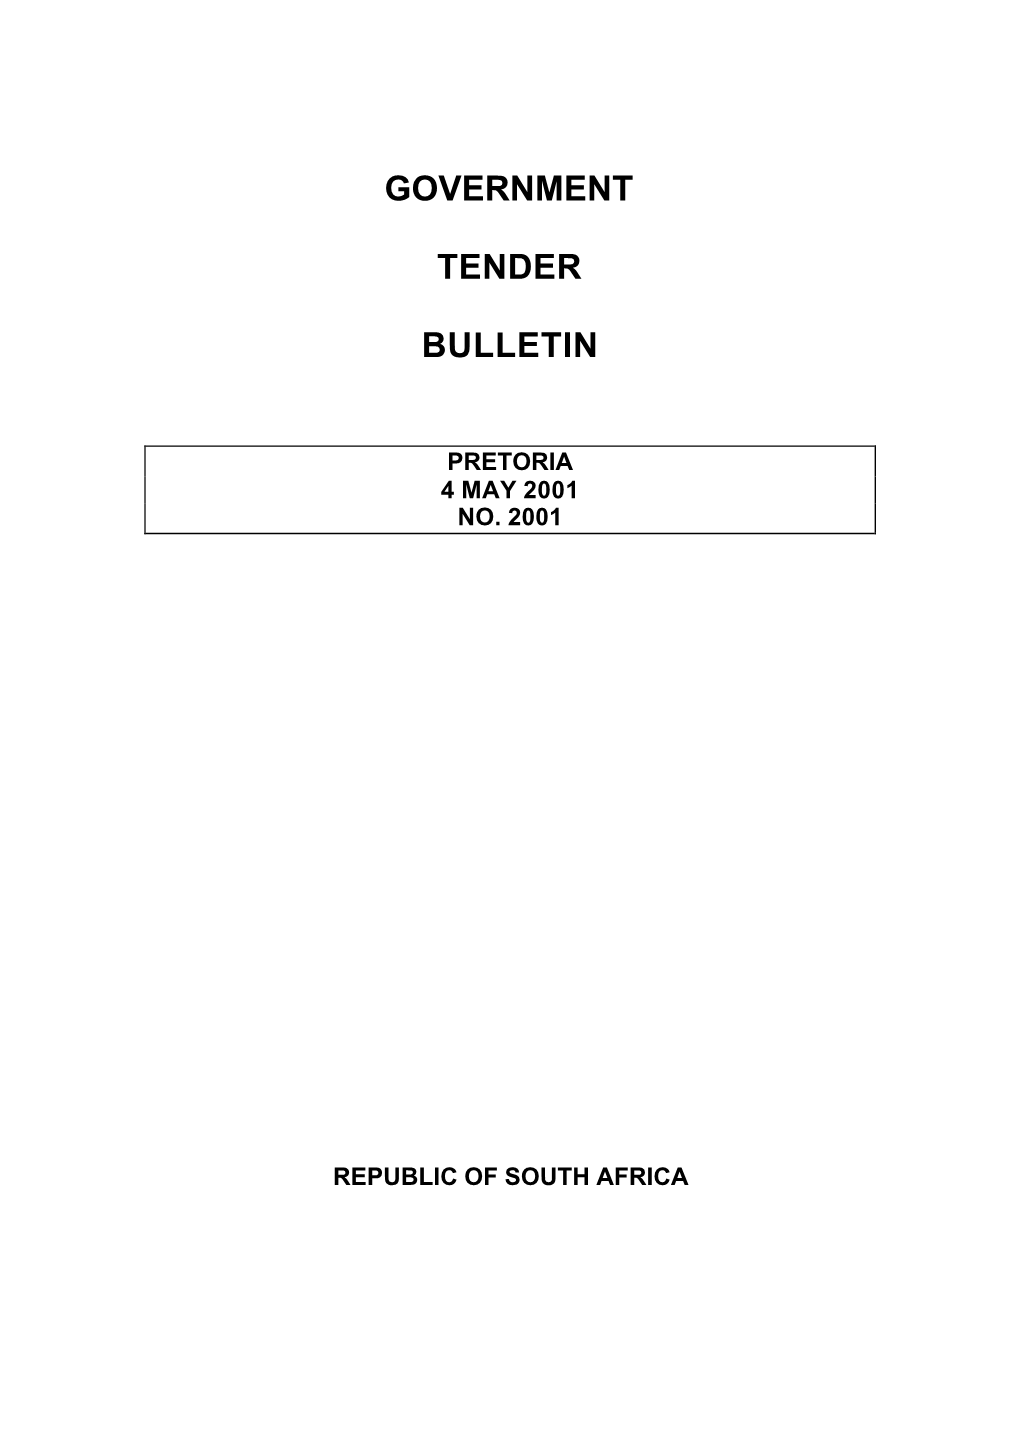 Government Tender Bulletin, 4 May 2001